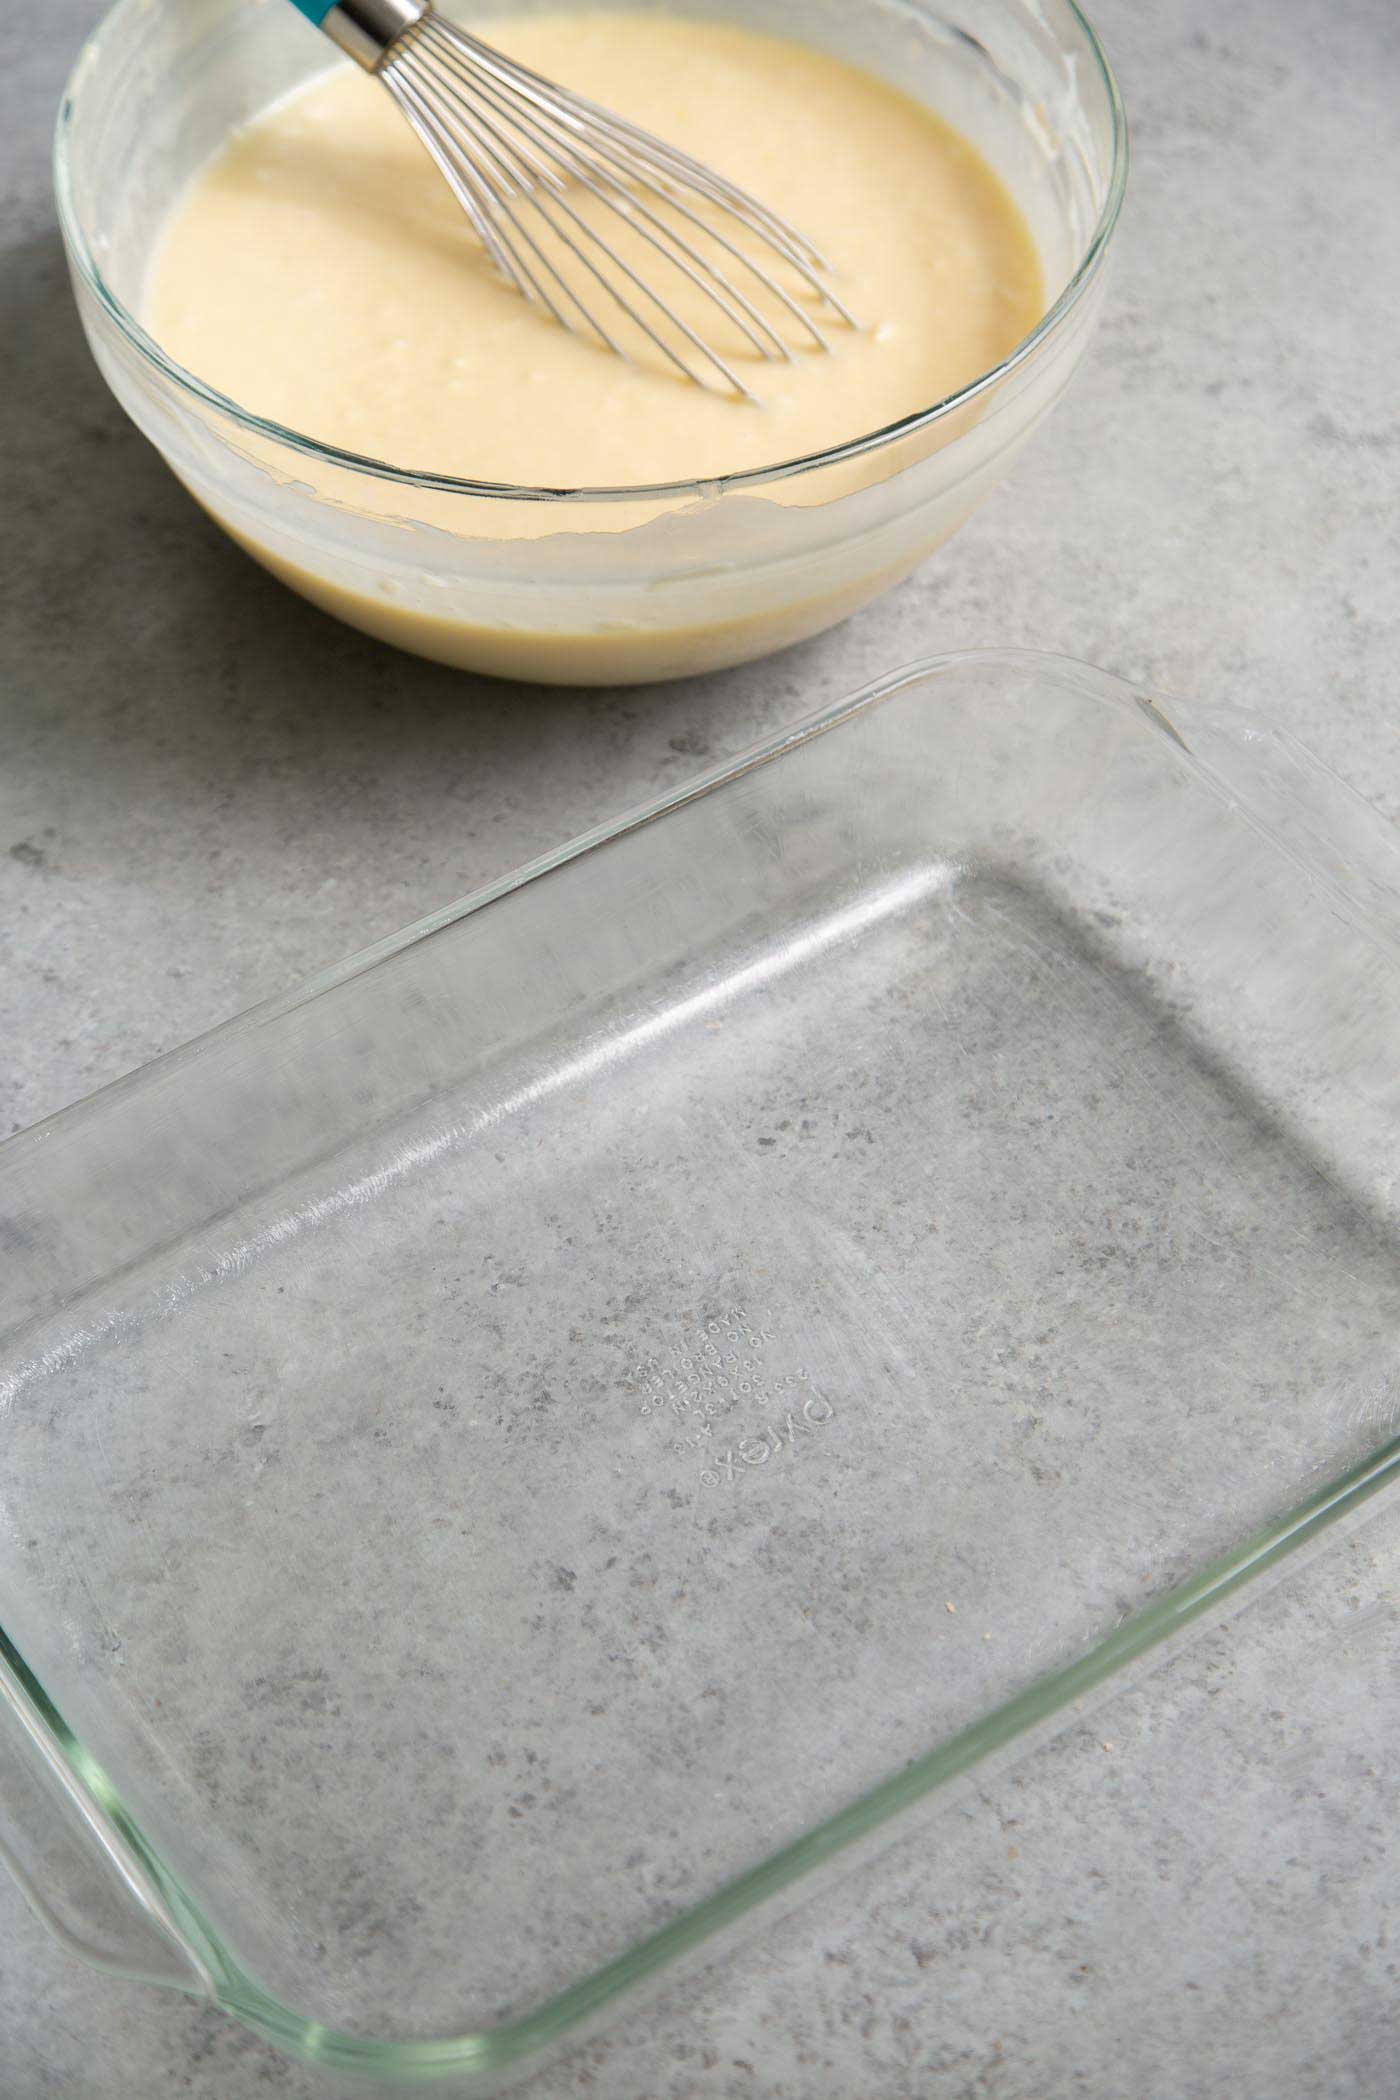 Butter Mochi baked in glass pyrex dish